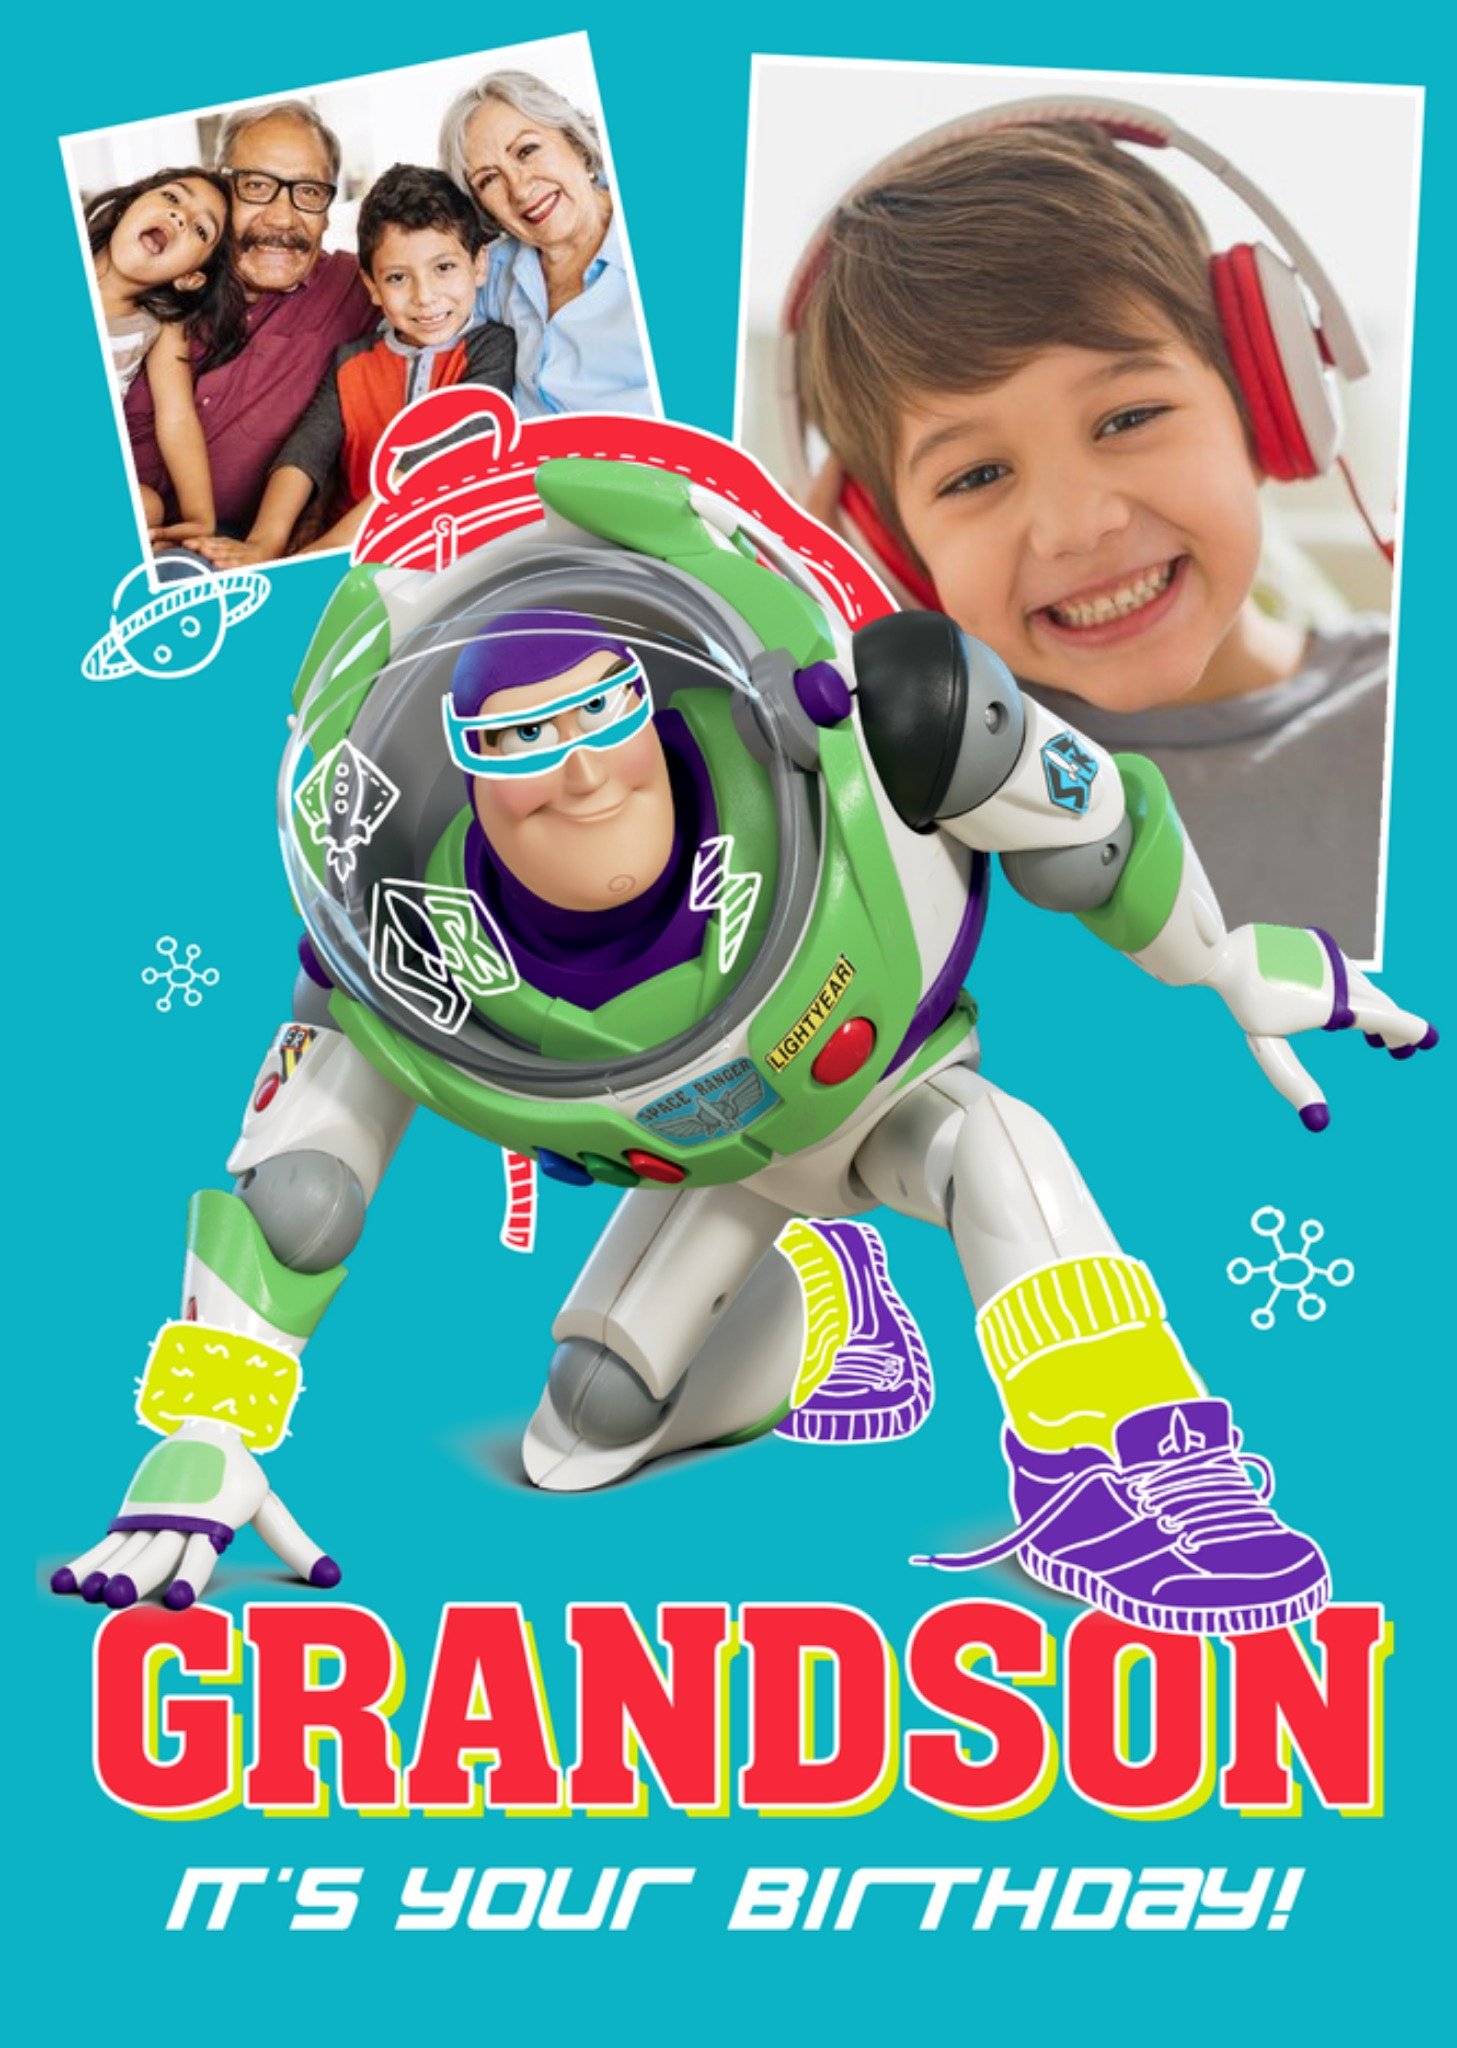 Toy Story Buzz Lightyear Grandson It's Your Birthday Photo Upload Card, Large